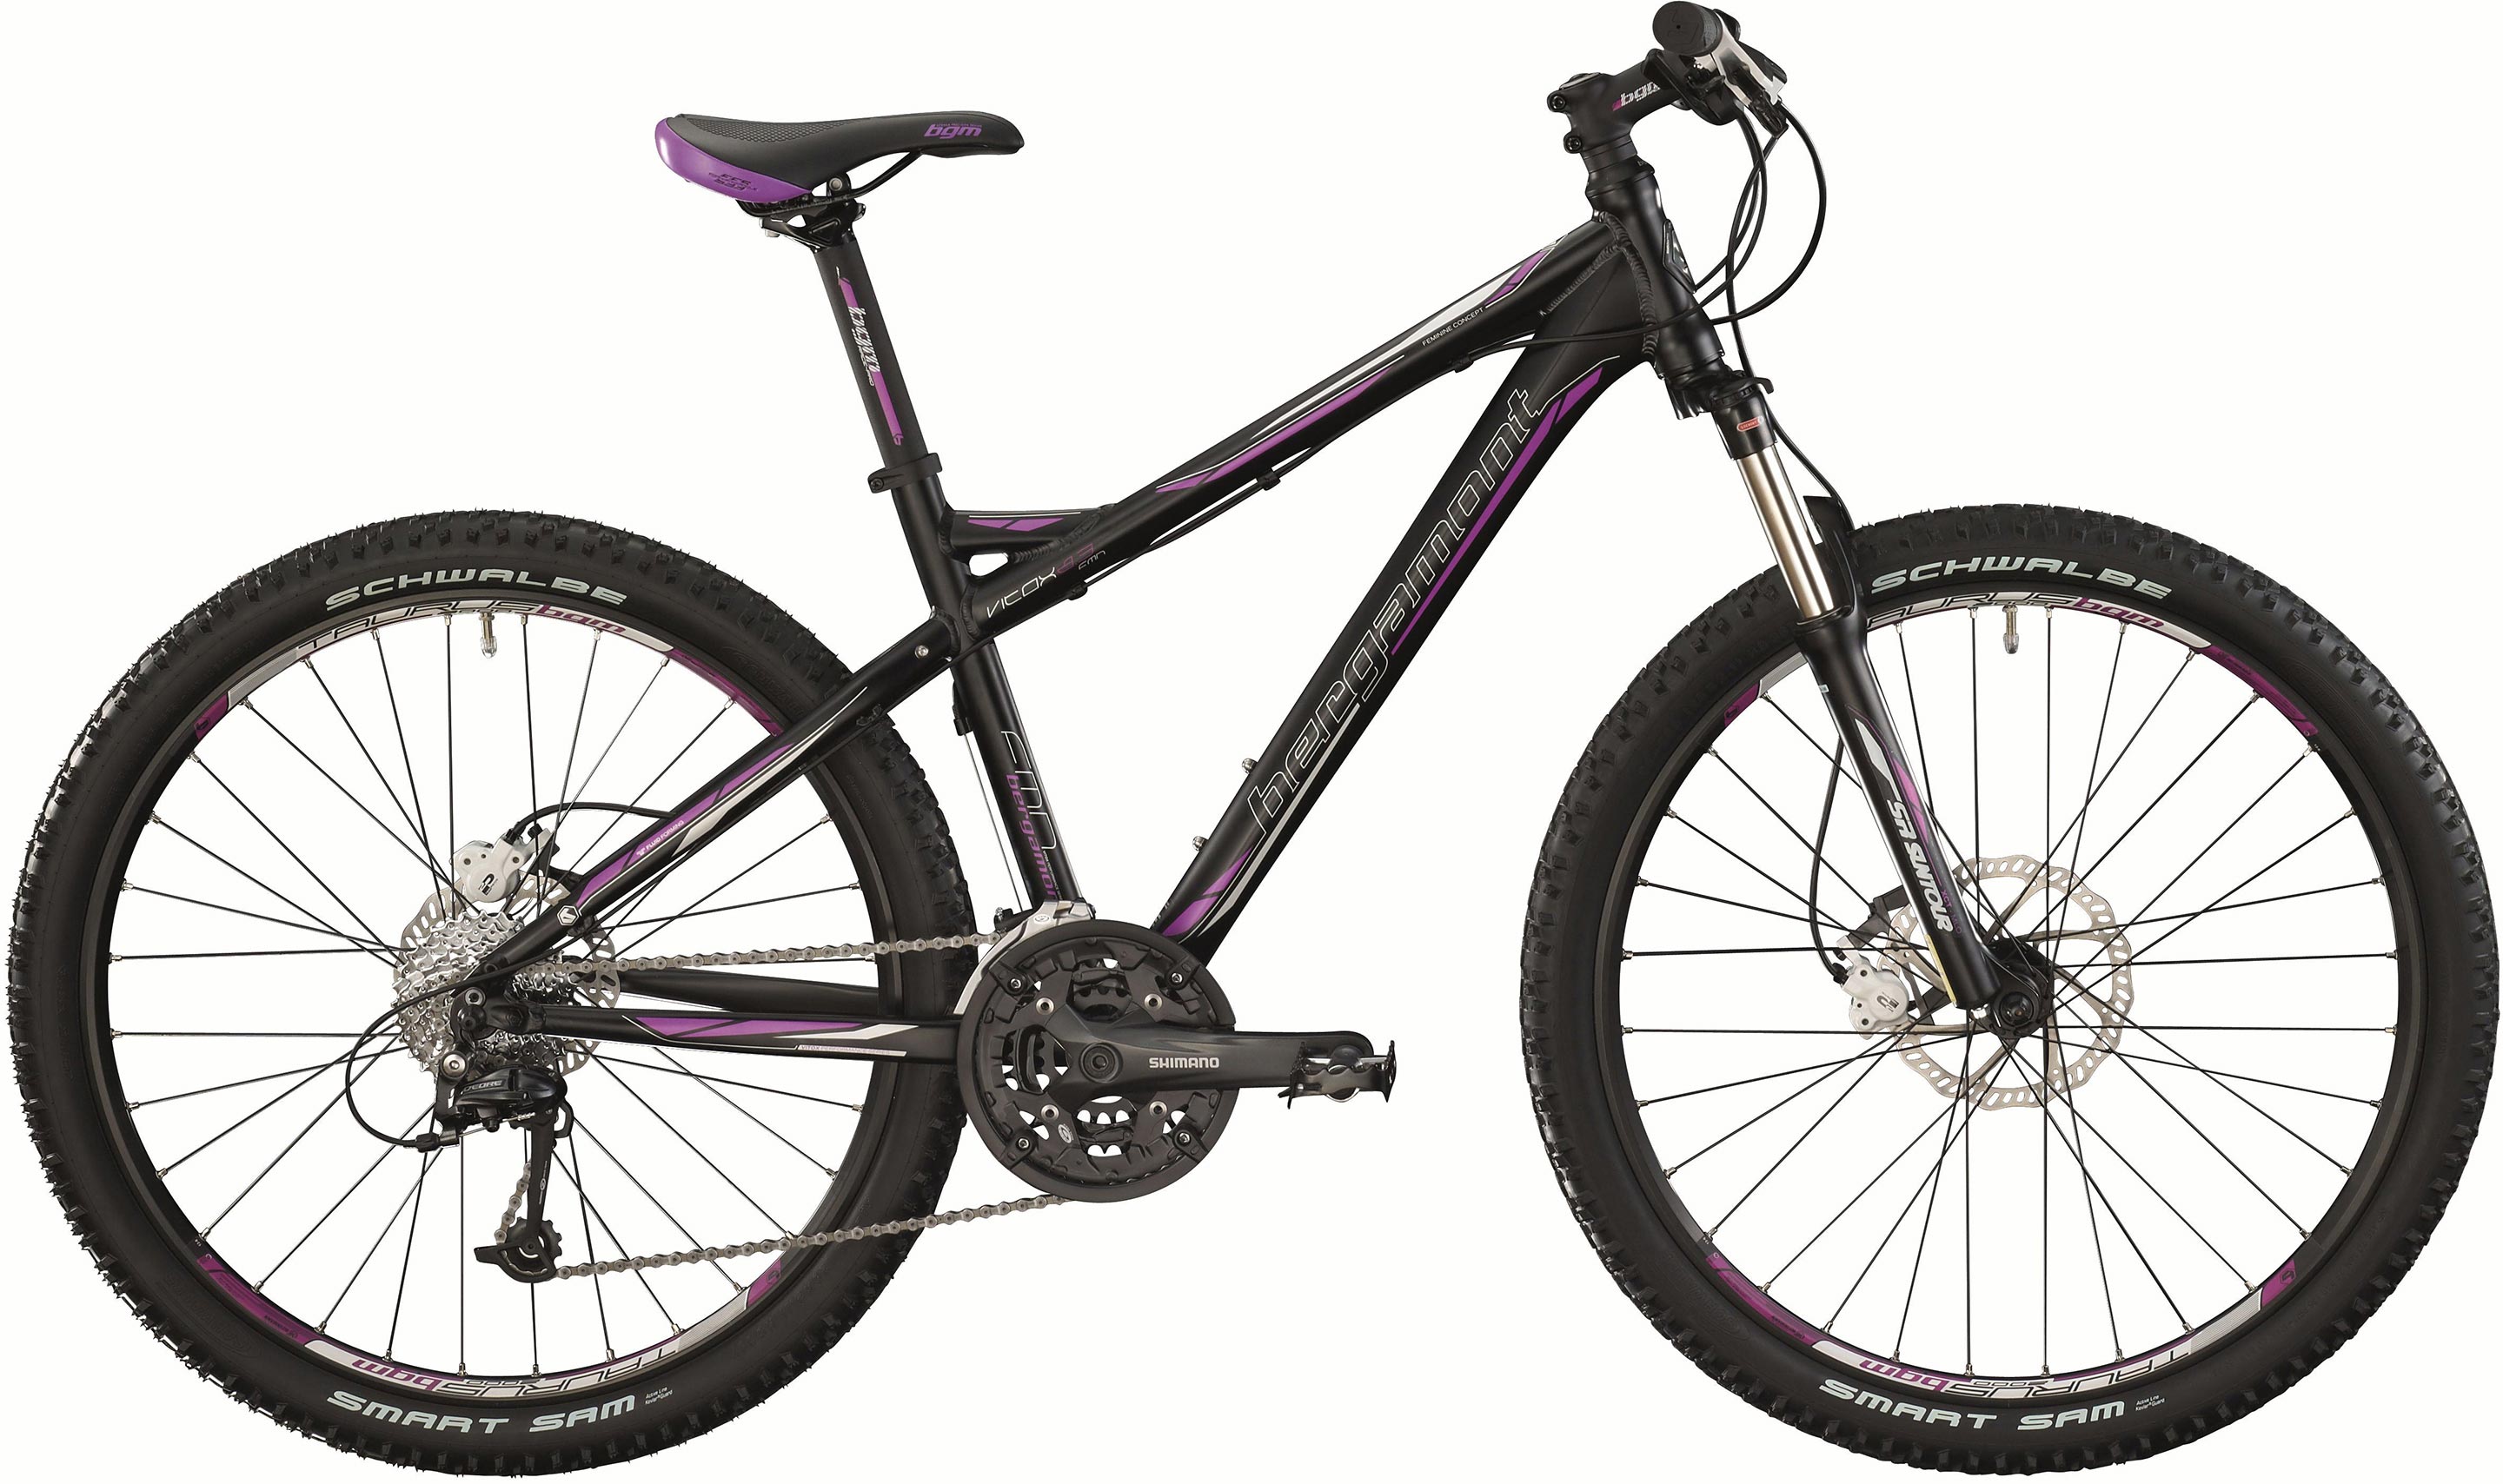 Vitox 8.3 FMN | Bouticycle